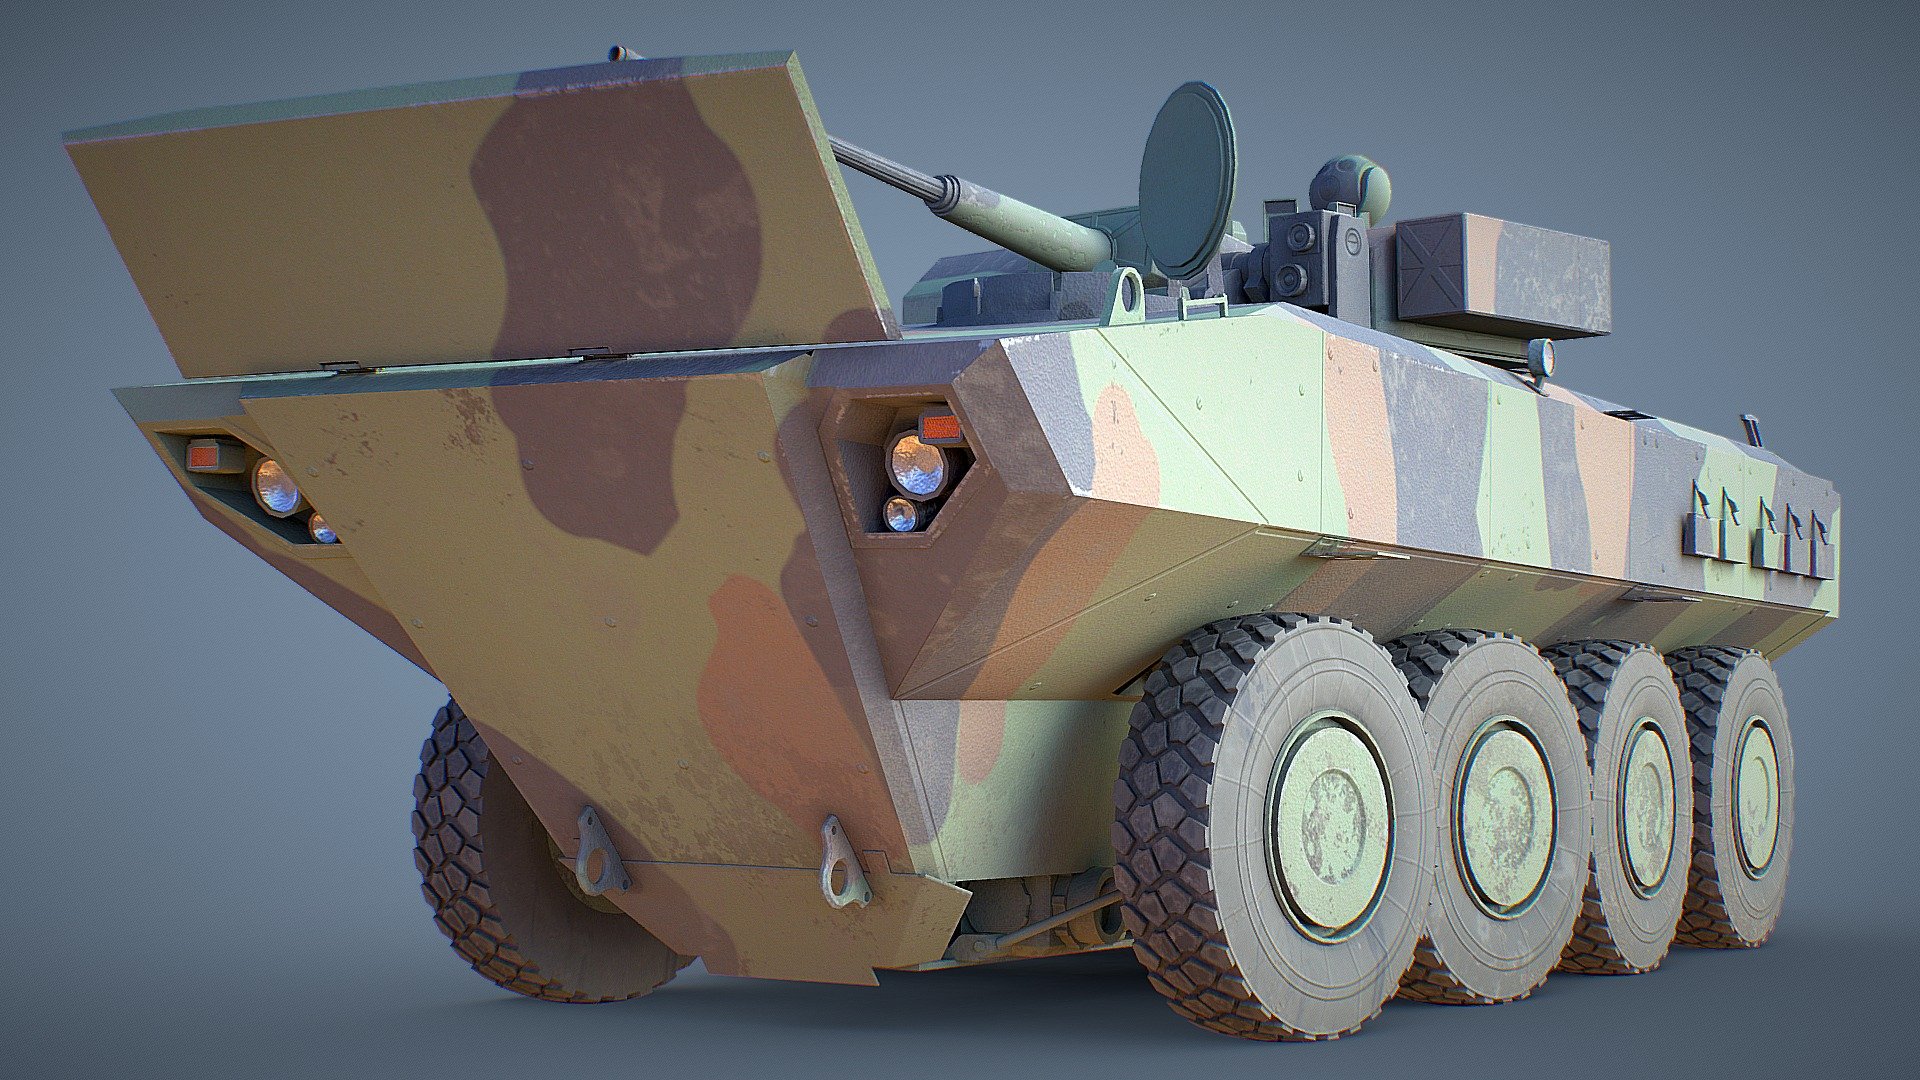 Amphibious Combat Vehicle. The Amphibious Combat Vehicle is an adaptable amphibious platform designed from the ground up to fulfill the complex mission objective of deploying Marines from ship to shore. This was a low poly model I made from scratch for a Navy contract 3d model